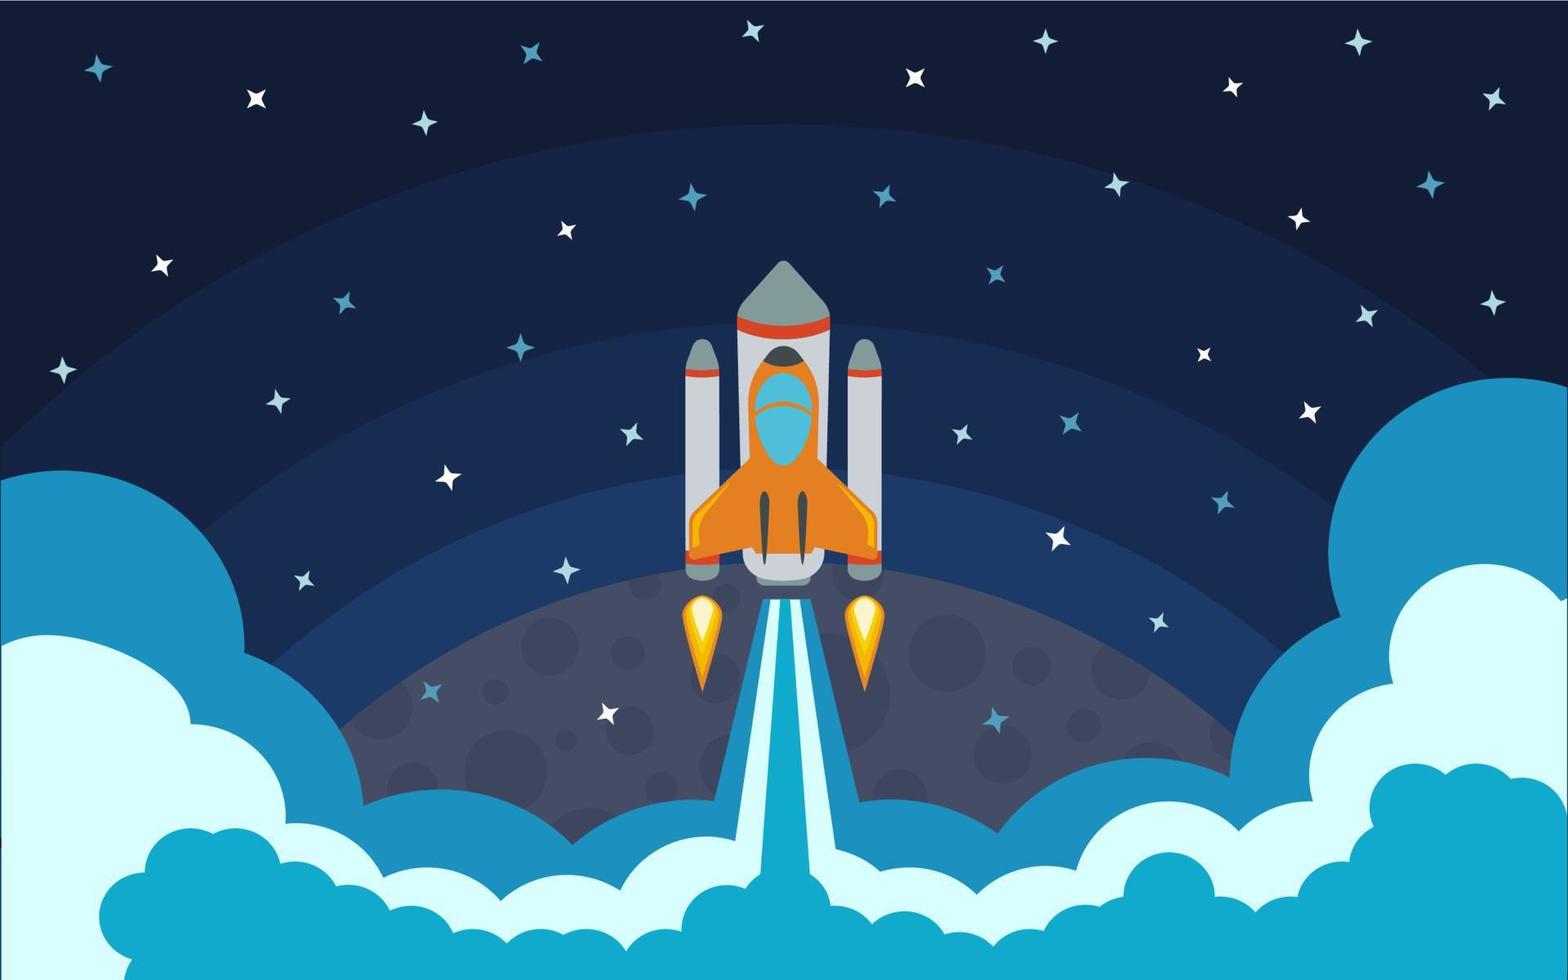 The rocket is removed from the planet. The rocket in space. Space travel. Vector illustration with flying rocket.